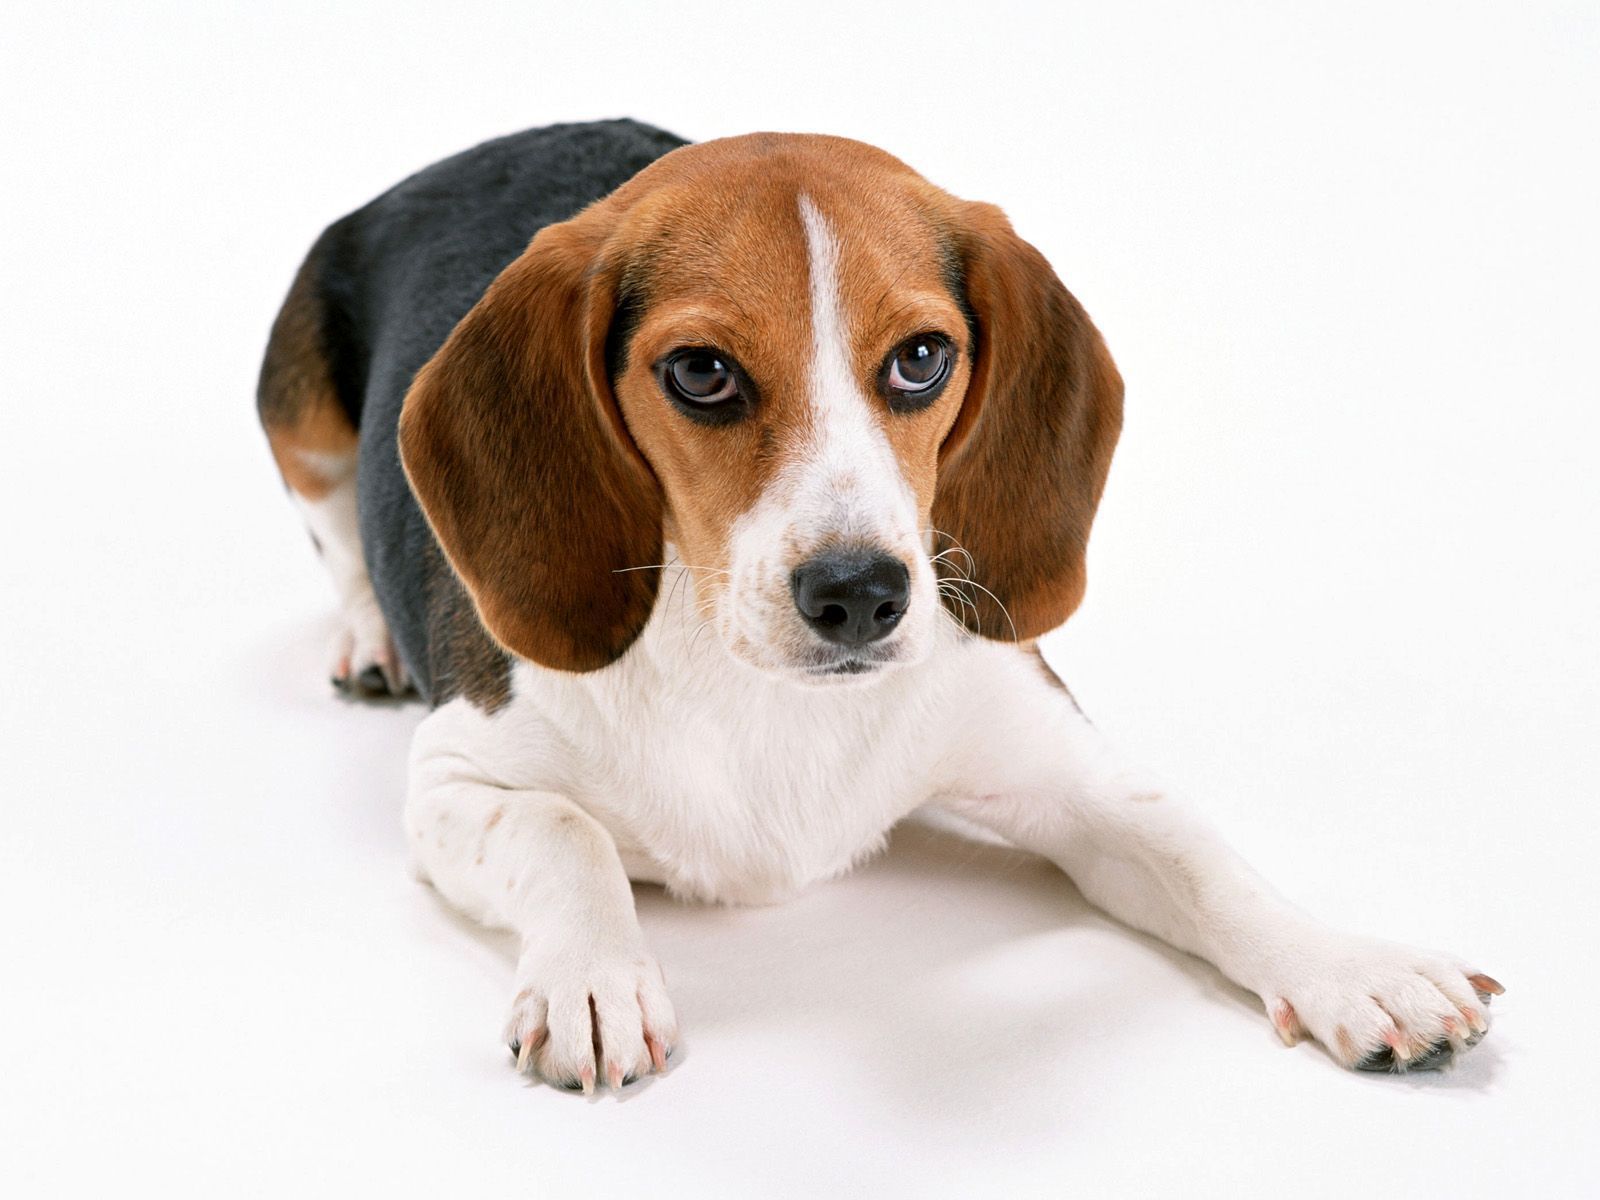 Beagle Dog Lying On A White Background Wallpaper And Image